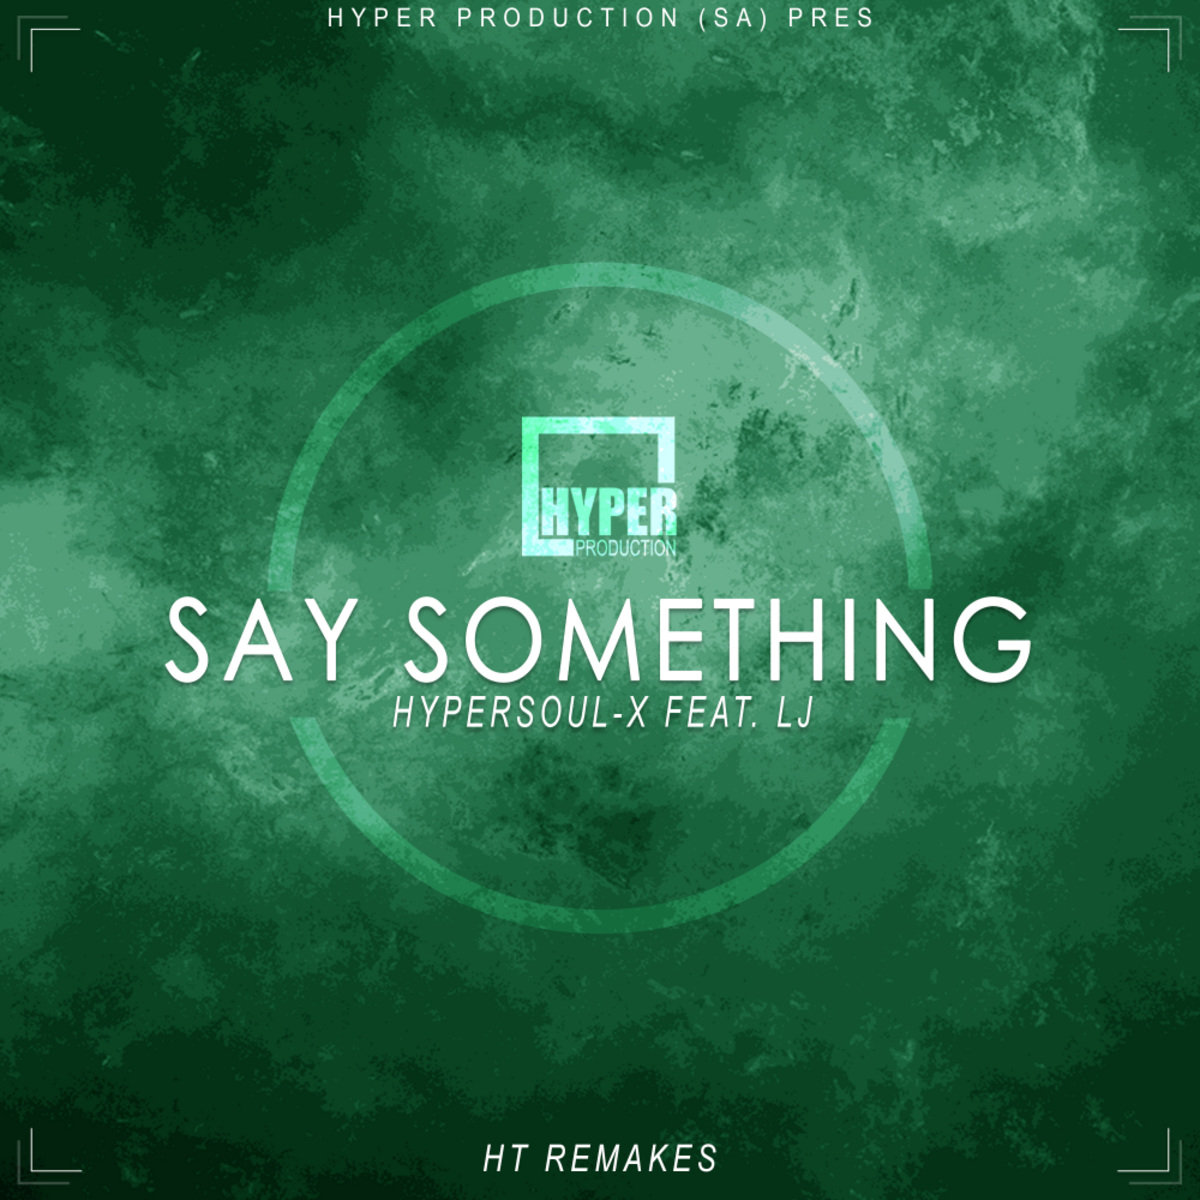 HyperSOUL-X ft LJ - Say Something (HT Remakes) / Hyper Production (SA)